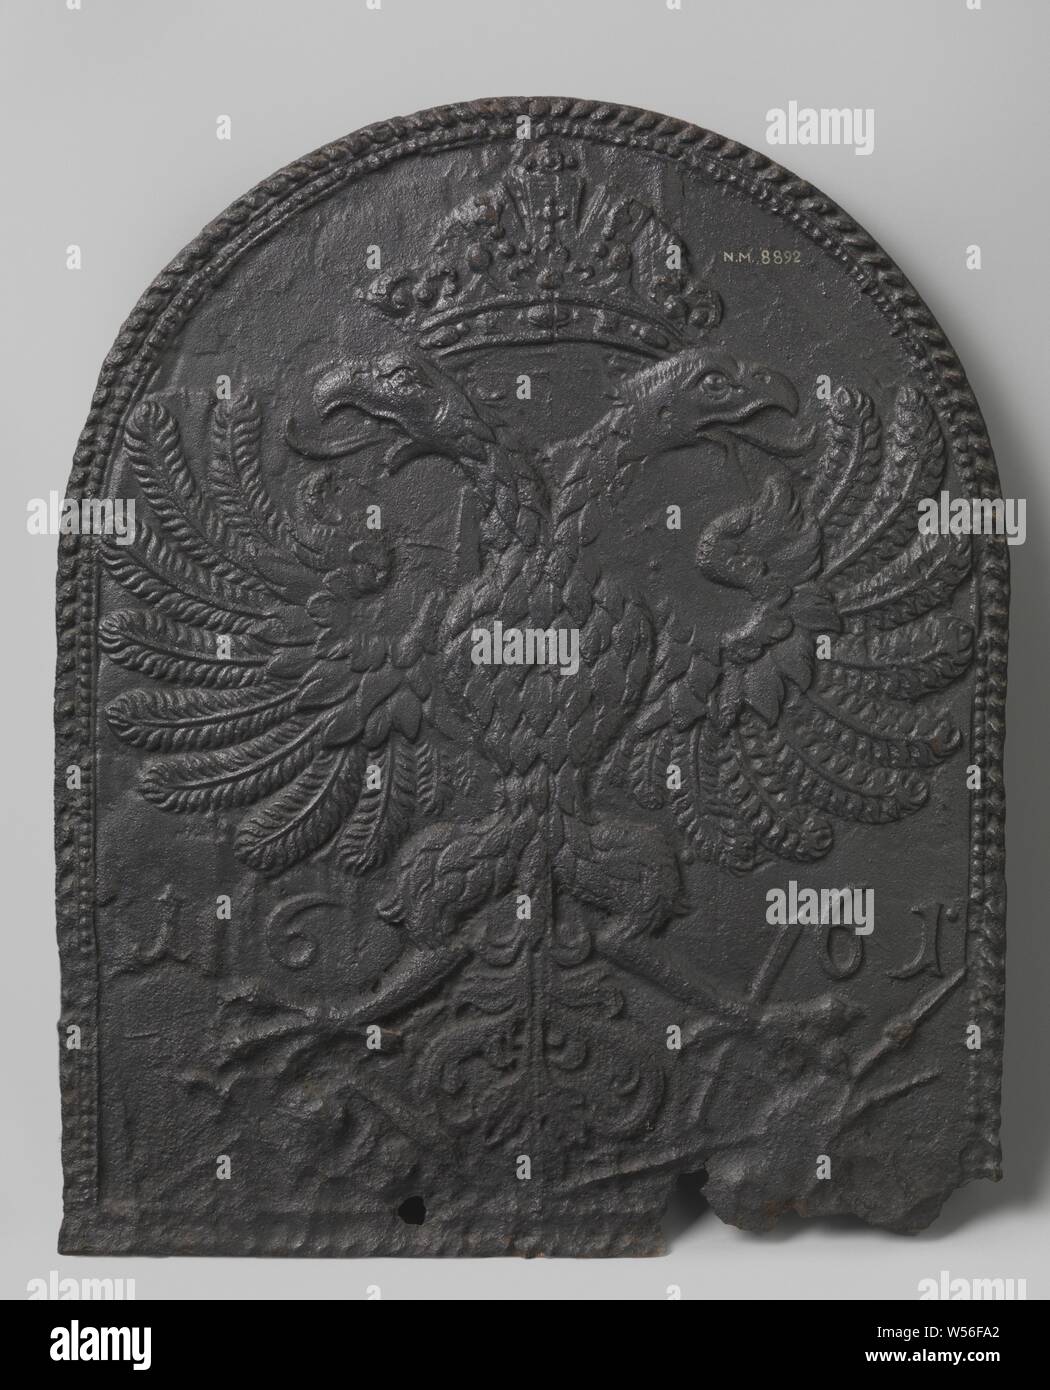 Fire plate with crowned double-headed eagle, Fire plate made of cast iron, with a semicircular top. In the middle is a double-headed eagle with spread wings and claws. Above that a crown. Next to the eagle the year 1661. The whole is framed by pearl border and decorative border., anonymous, Germany, in or after 1661 - 1675, iron (metal), founding, h 69.0 cm × w 58.0 cm × w 24 kg Stock Photo